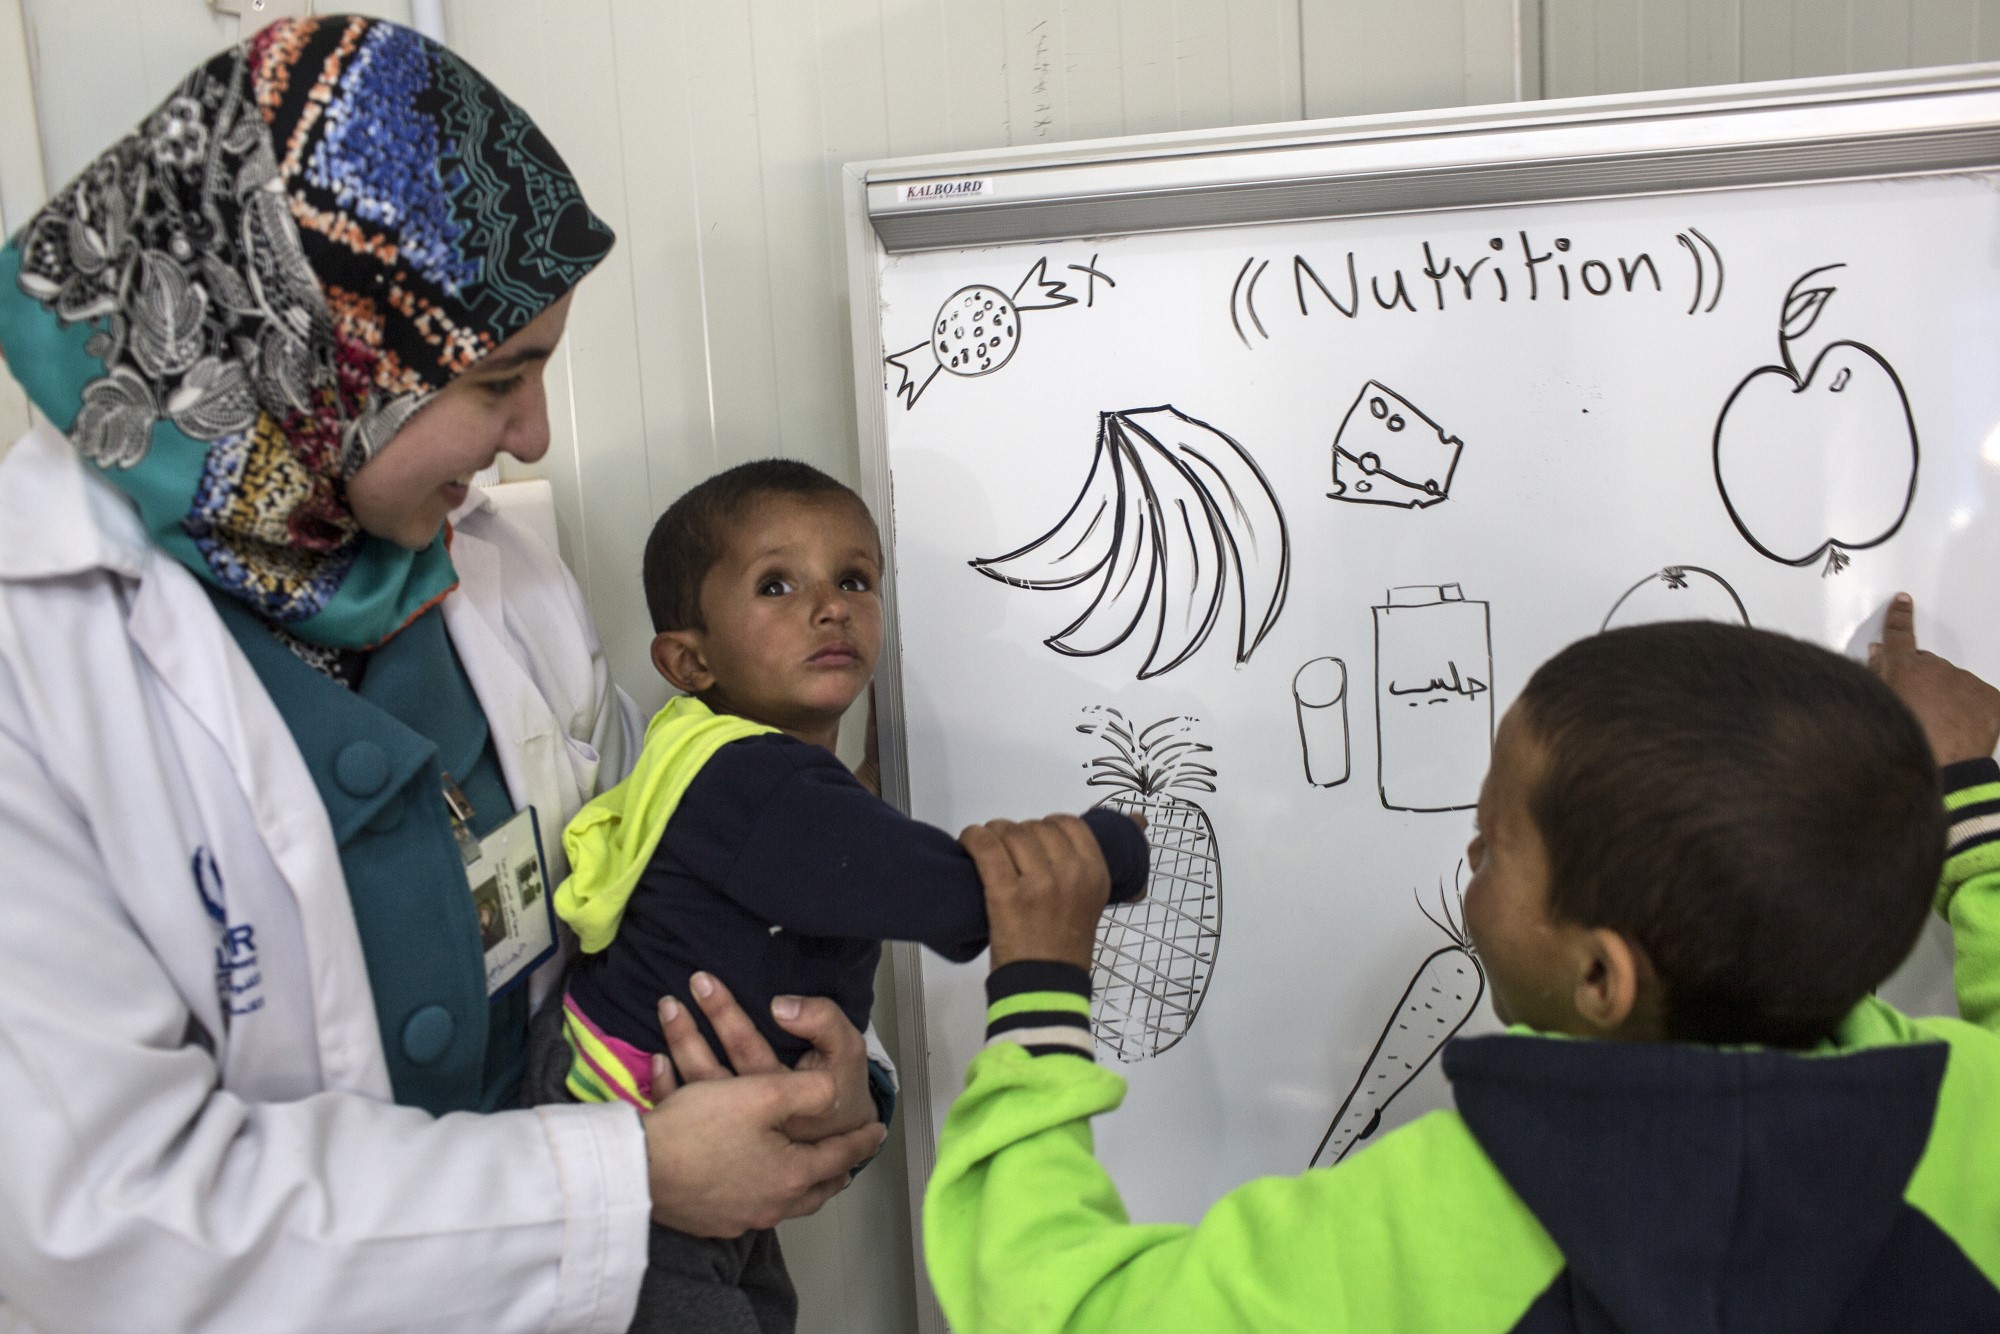 United Arab Emirates forms nutrition committee to draft national strategy